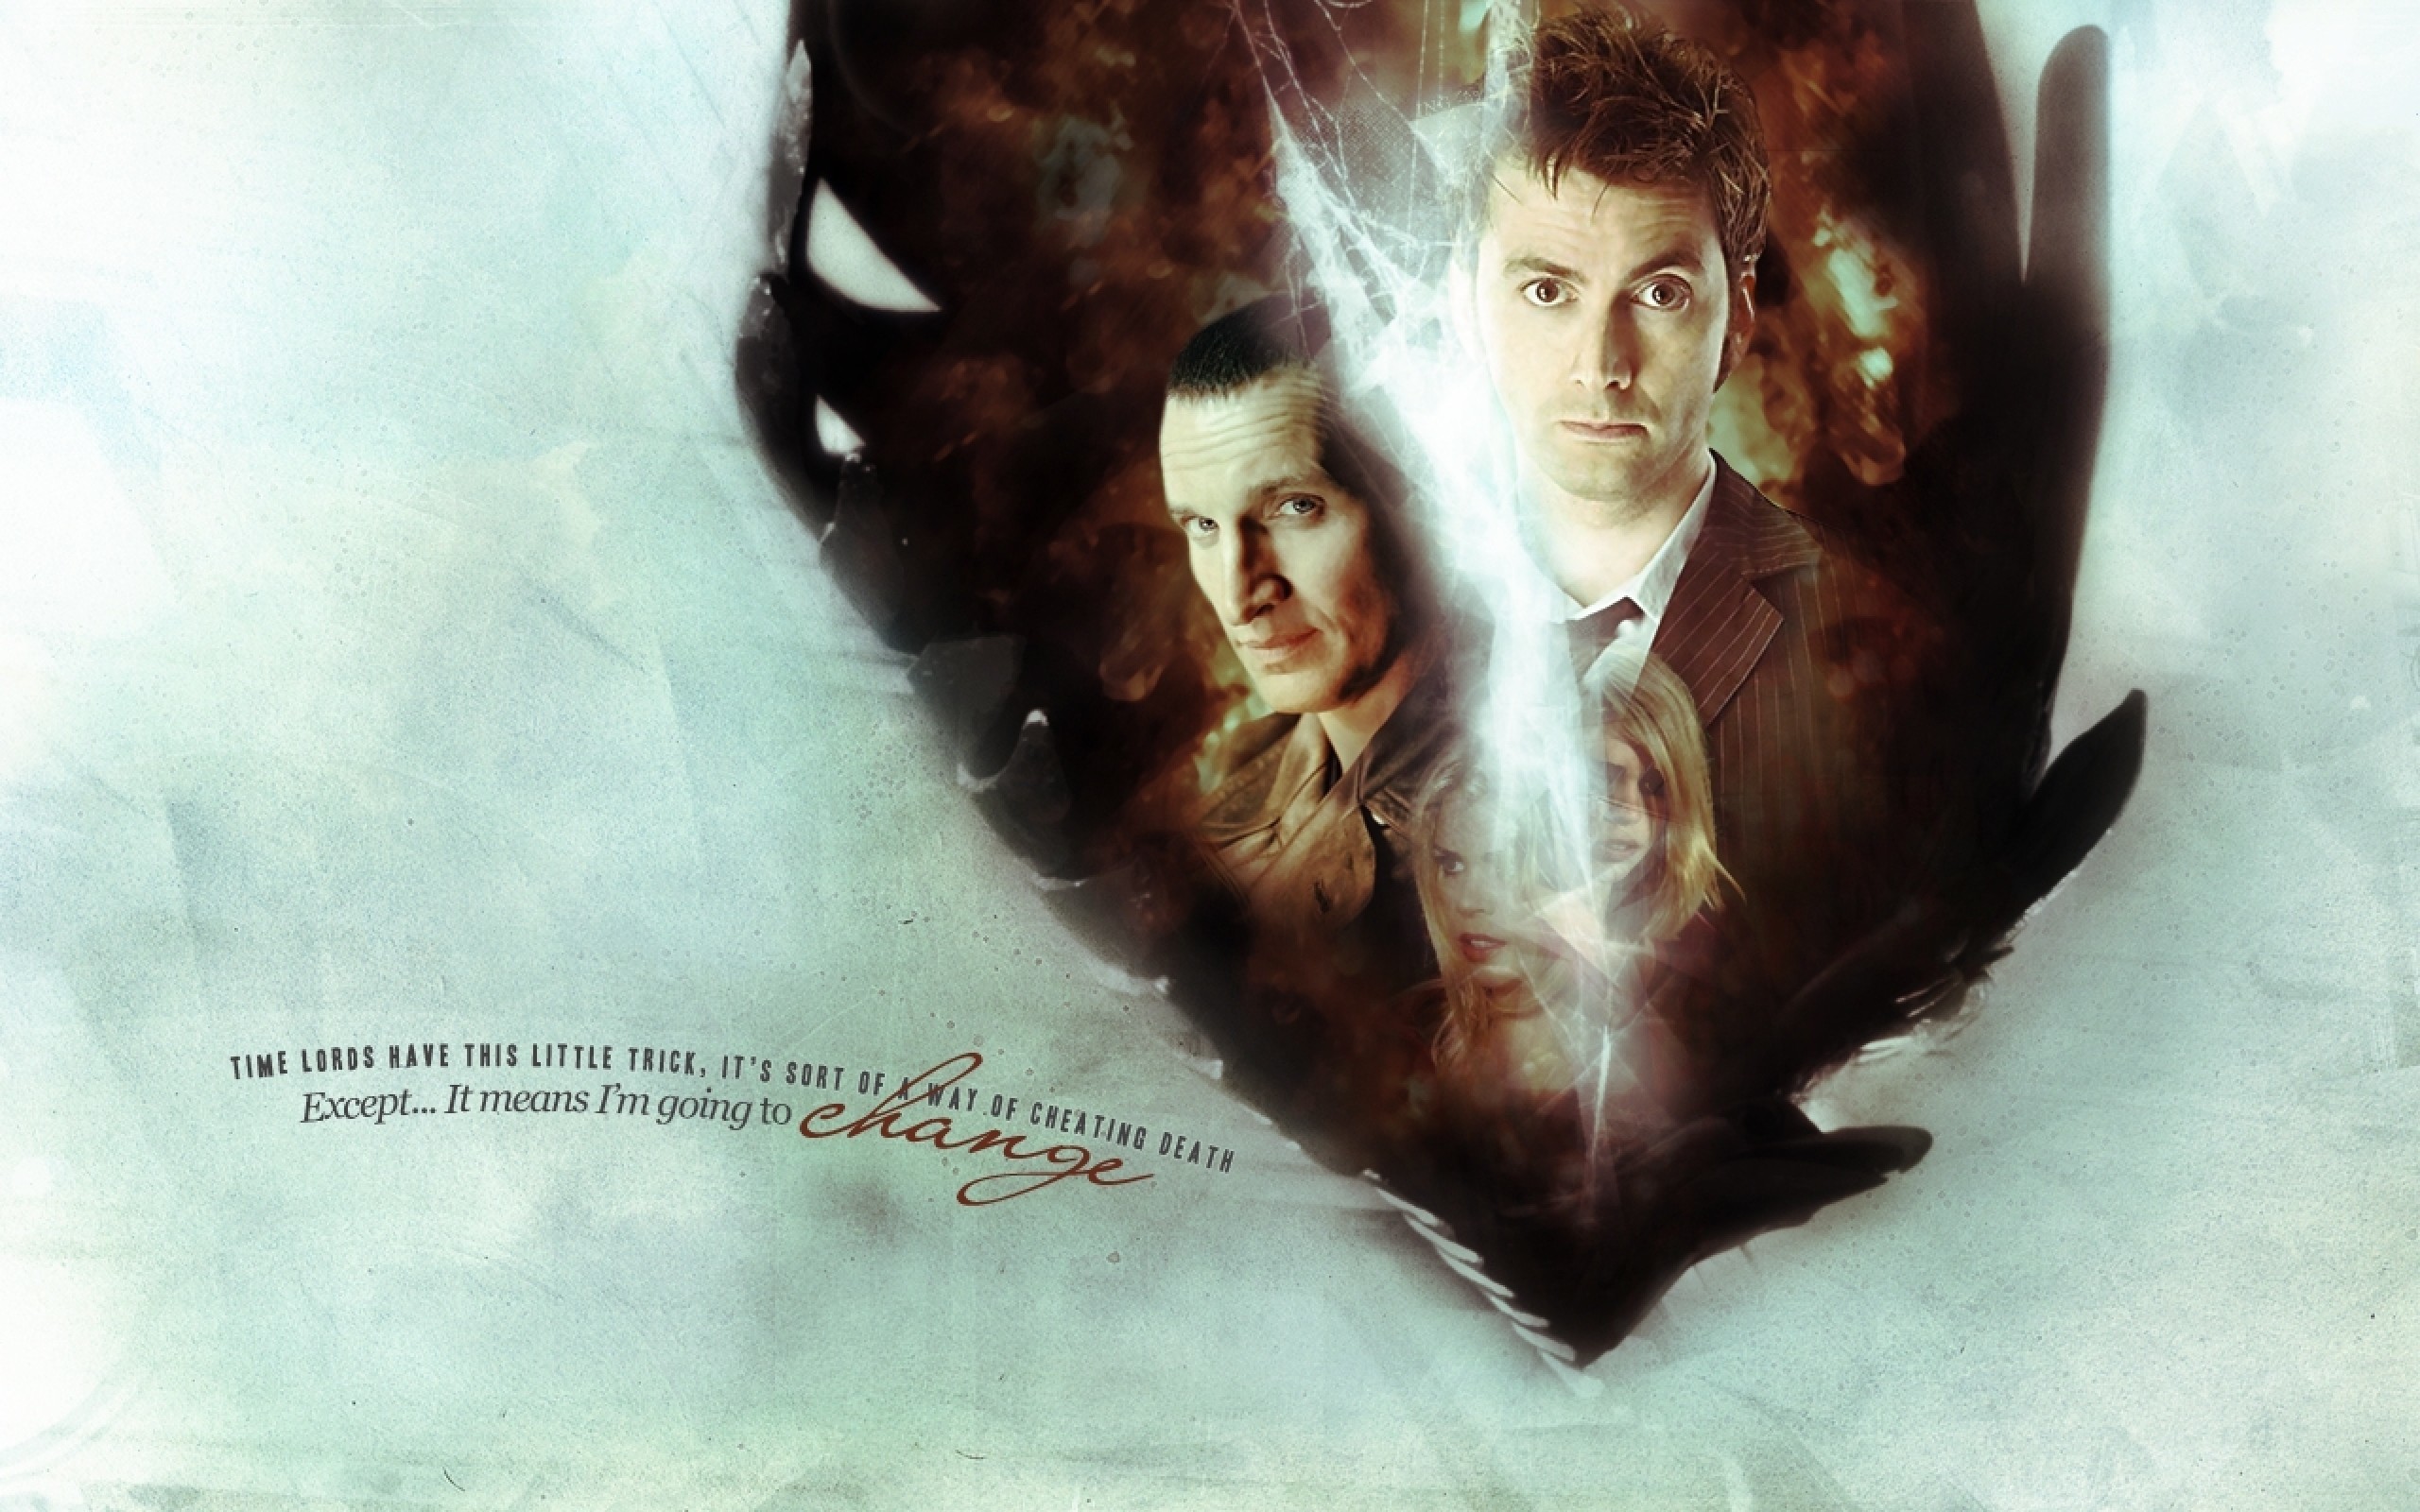 Doctor Who, The Doctor, TARDIS, Christopher Eccleston, David Tennant, Billie Piper, Tenth Doctor, Quote, Rose Tyler Wallpapers HD / Desktop and Mobile